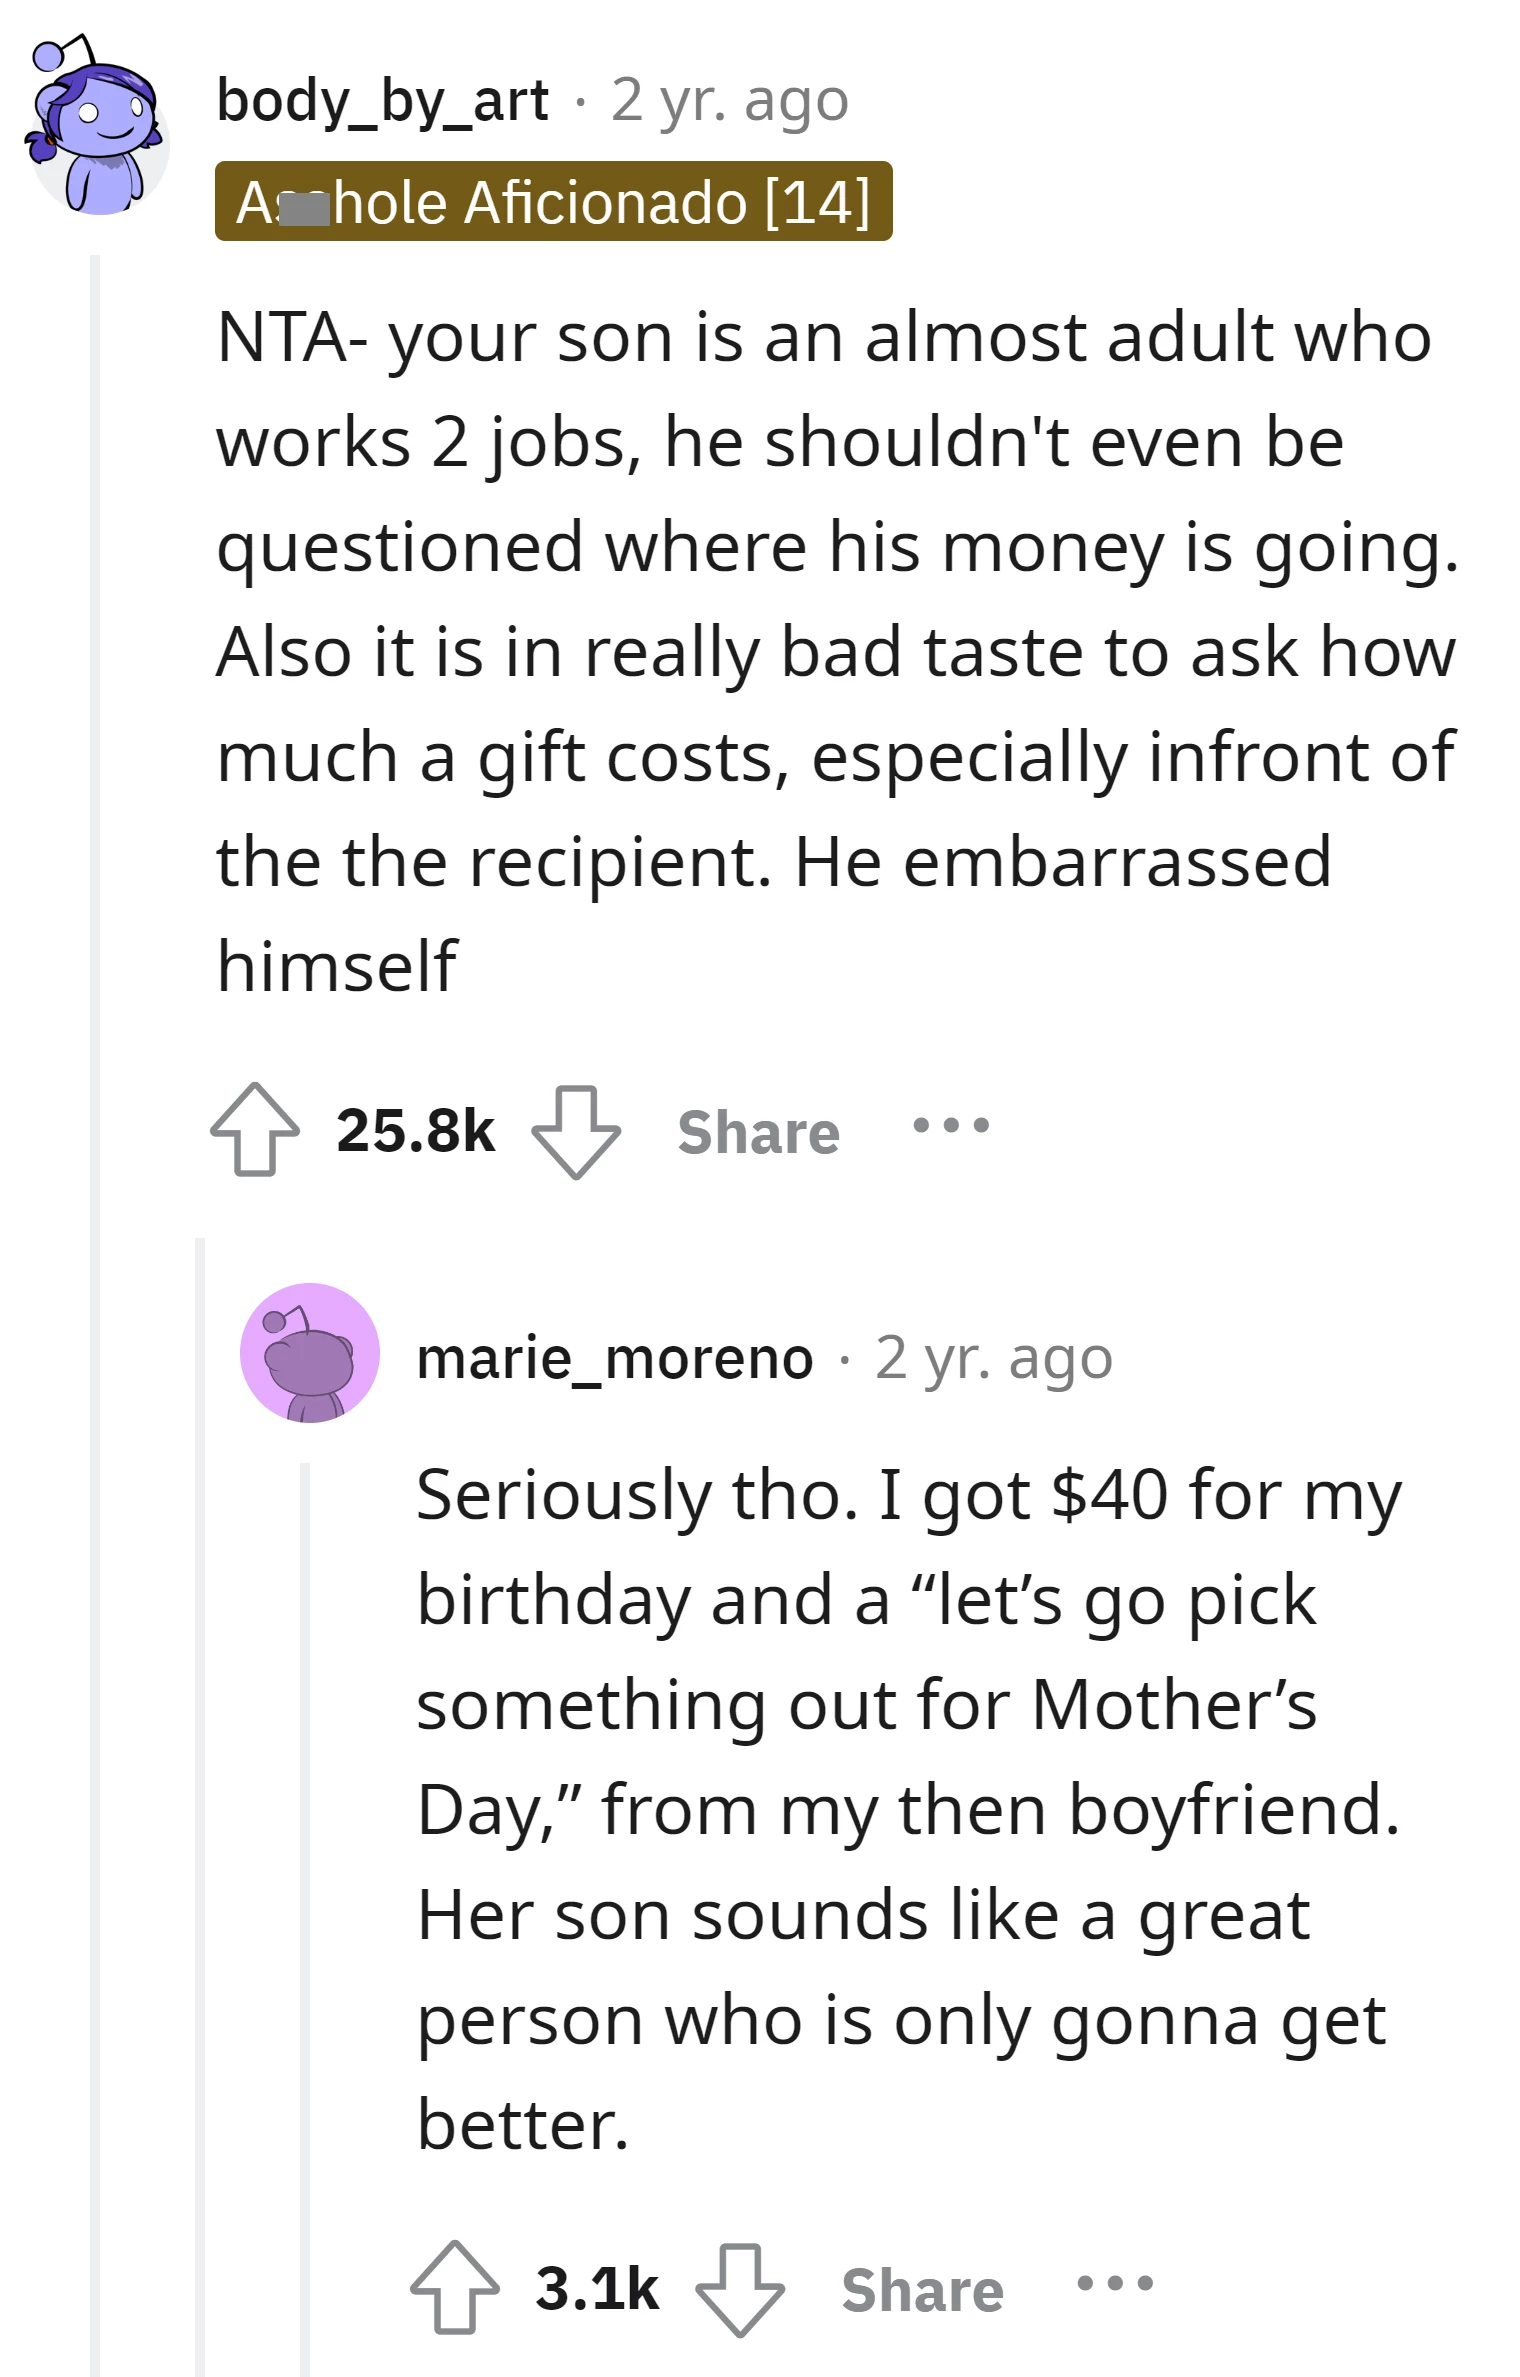 It's inappropriate for the husband to ask about the gift's cost